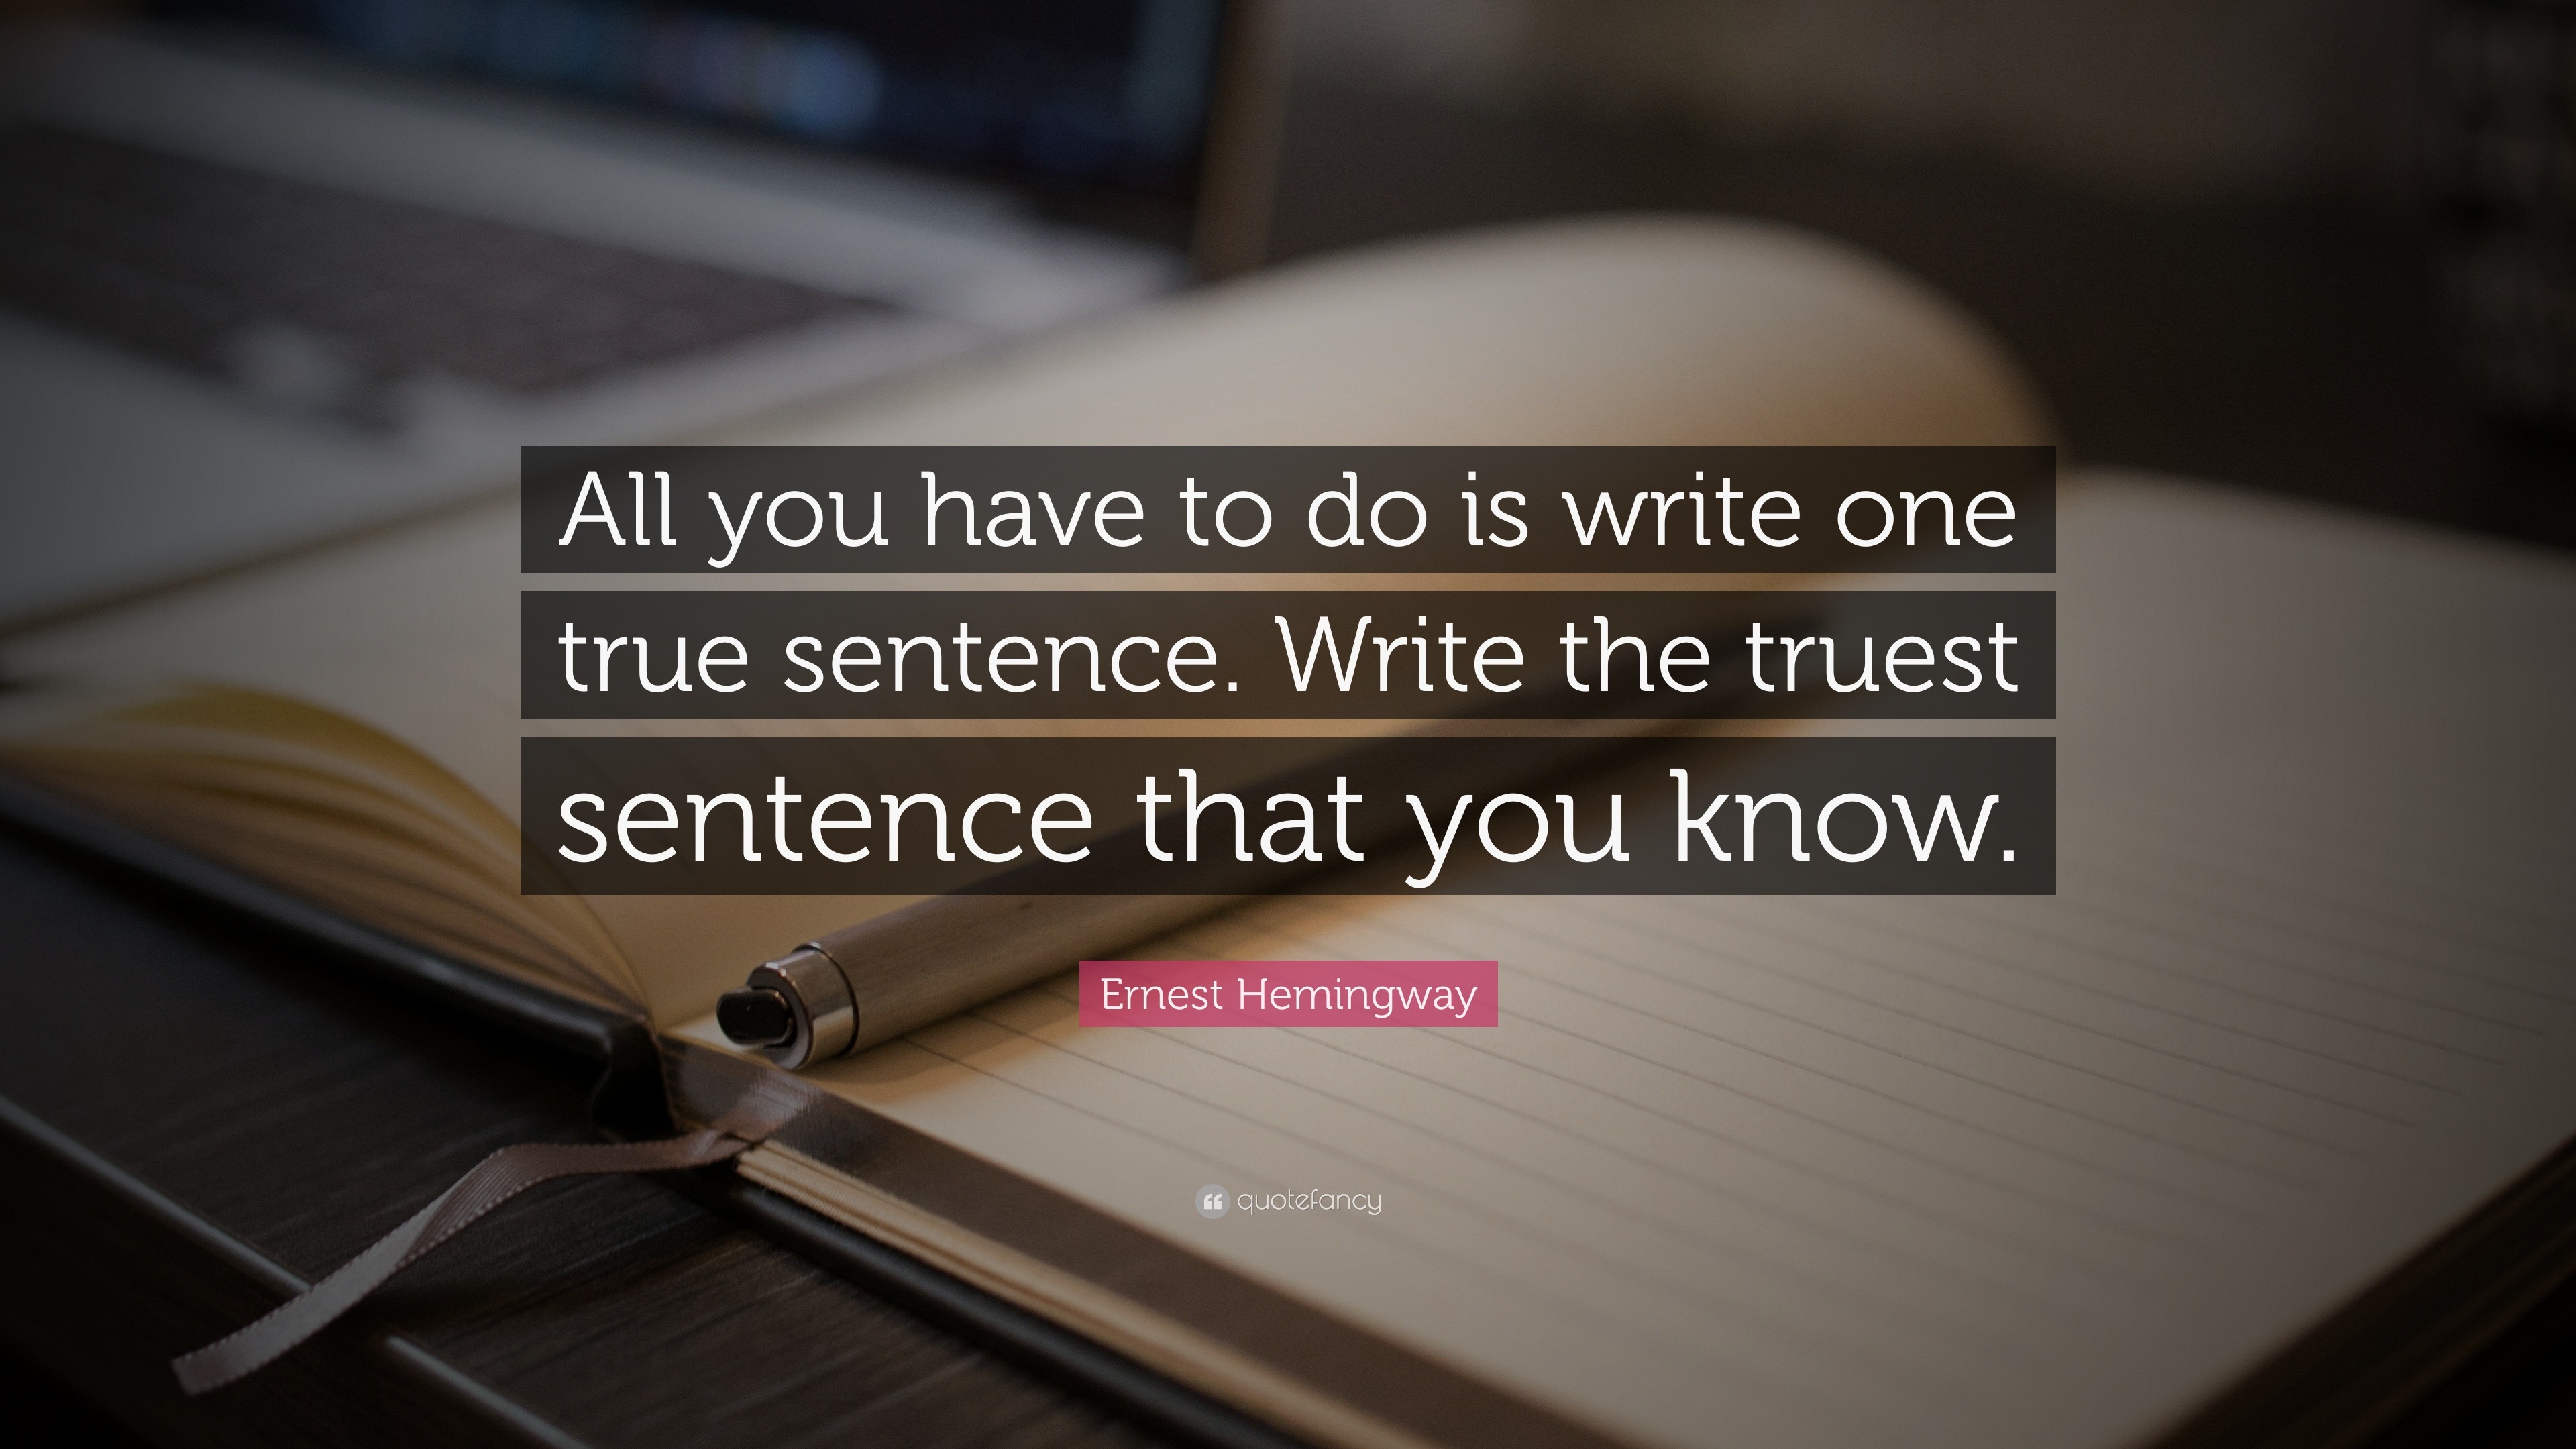 Ernest Hemingway Quote: “All you have to do is write one true sentence